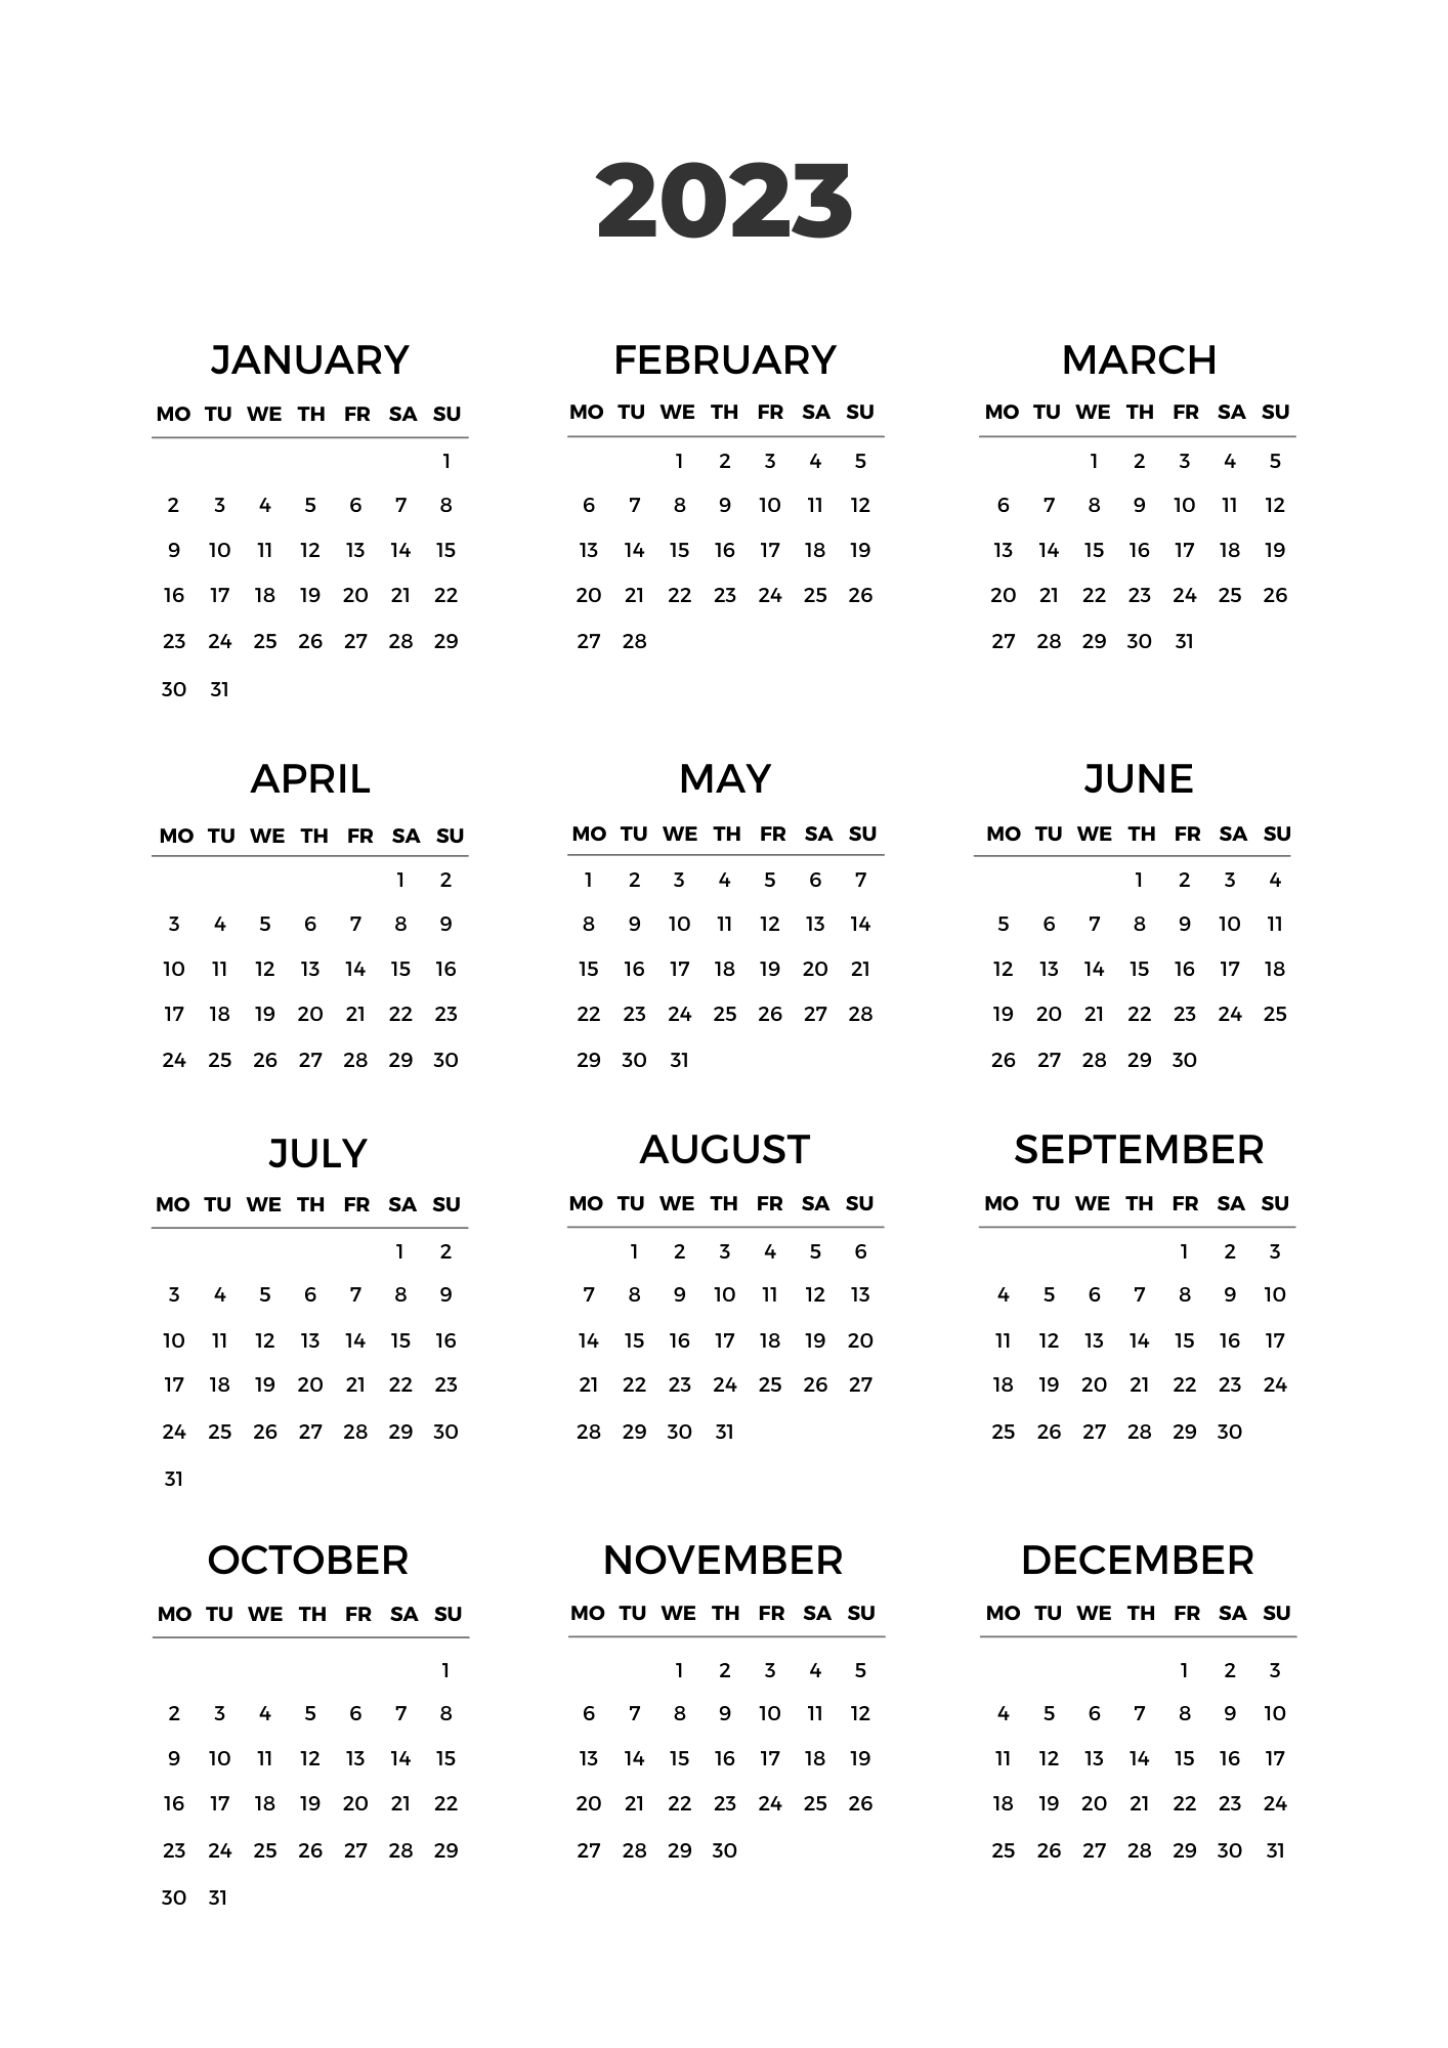 Get Organized with a Free 2023 Calendar Printable PDF - Sharing Our ...